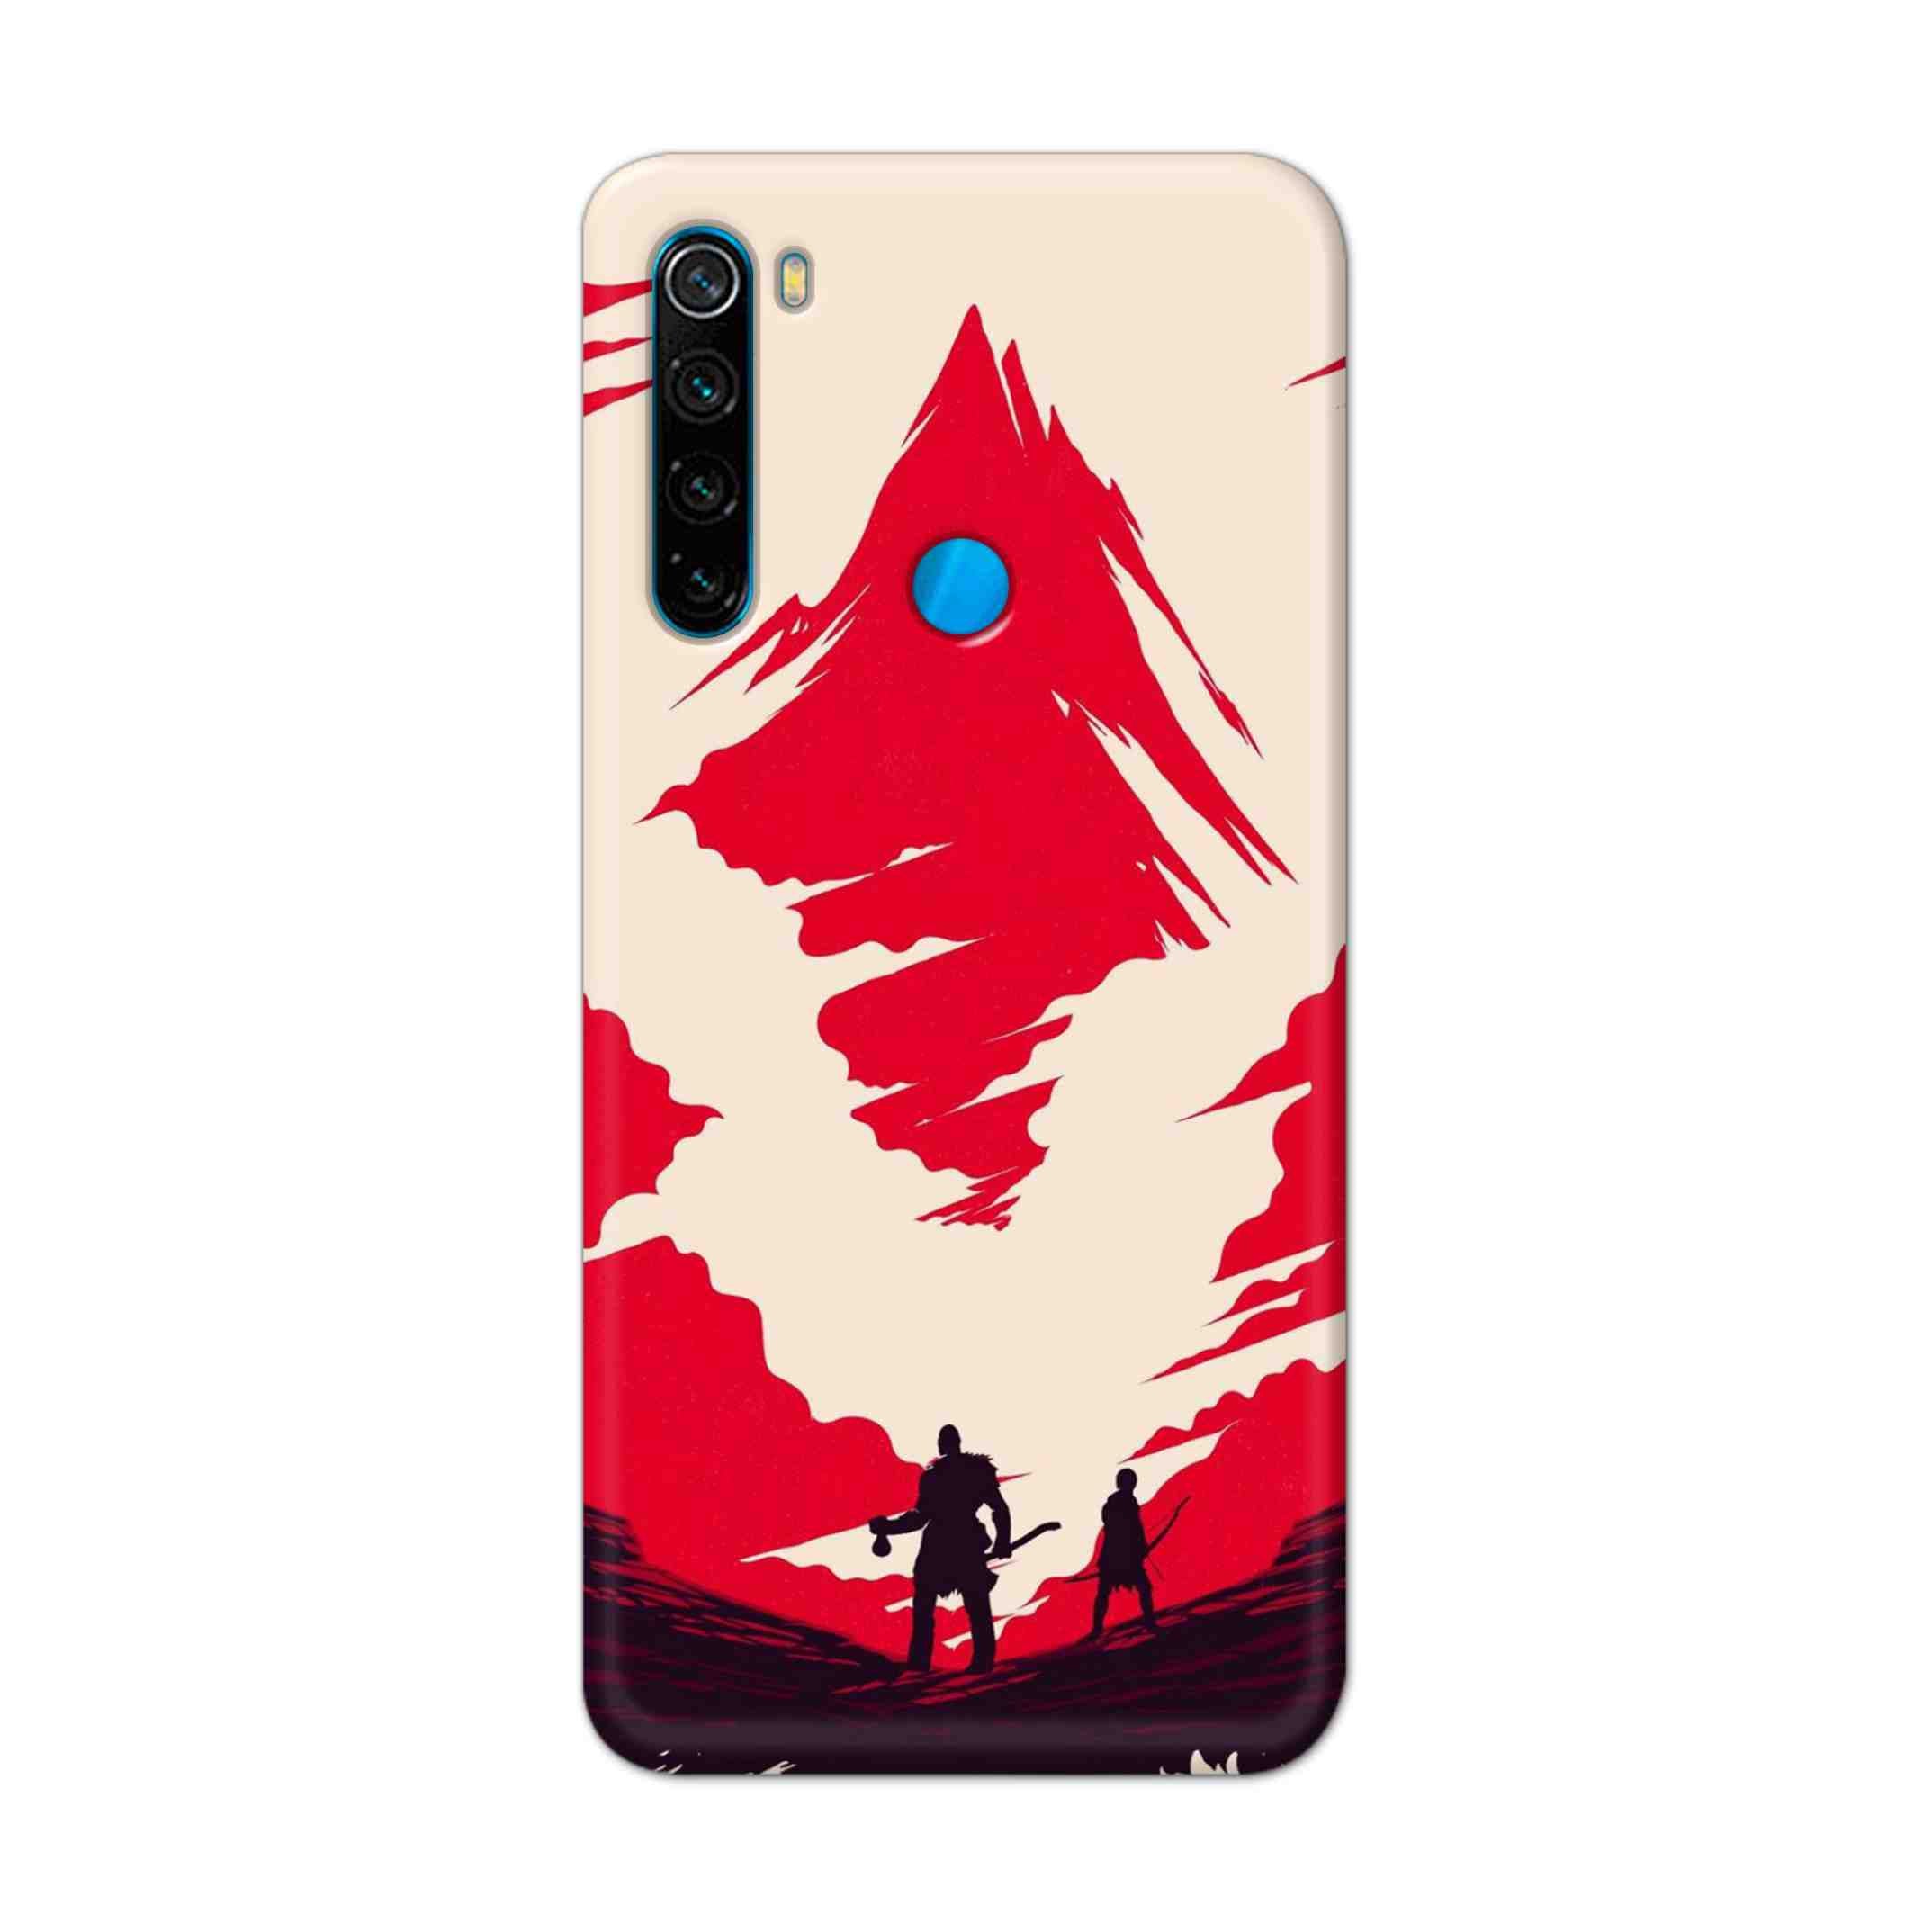 Buy God Of War Art Hard Back Mobile Phone Case Cover For Xiaomi Redmi Note 8 Online